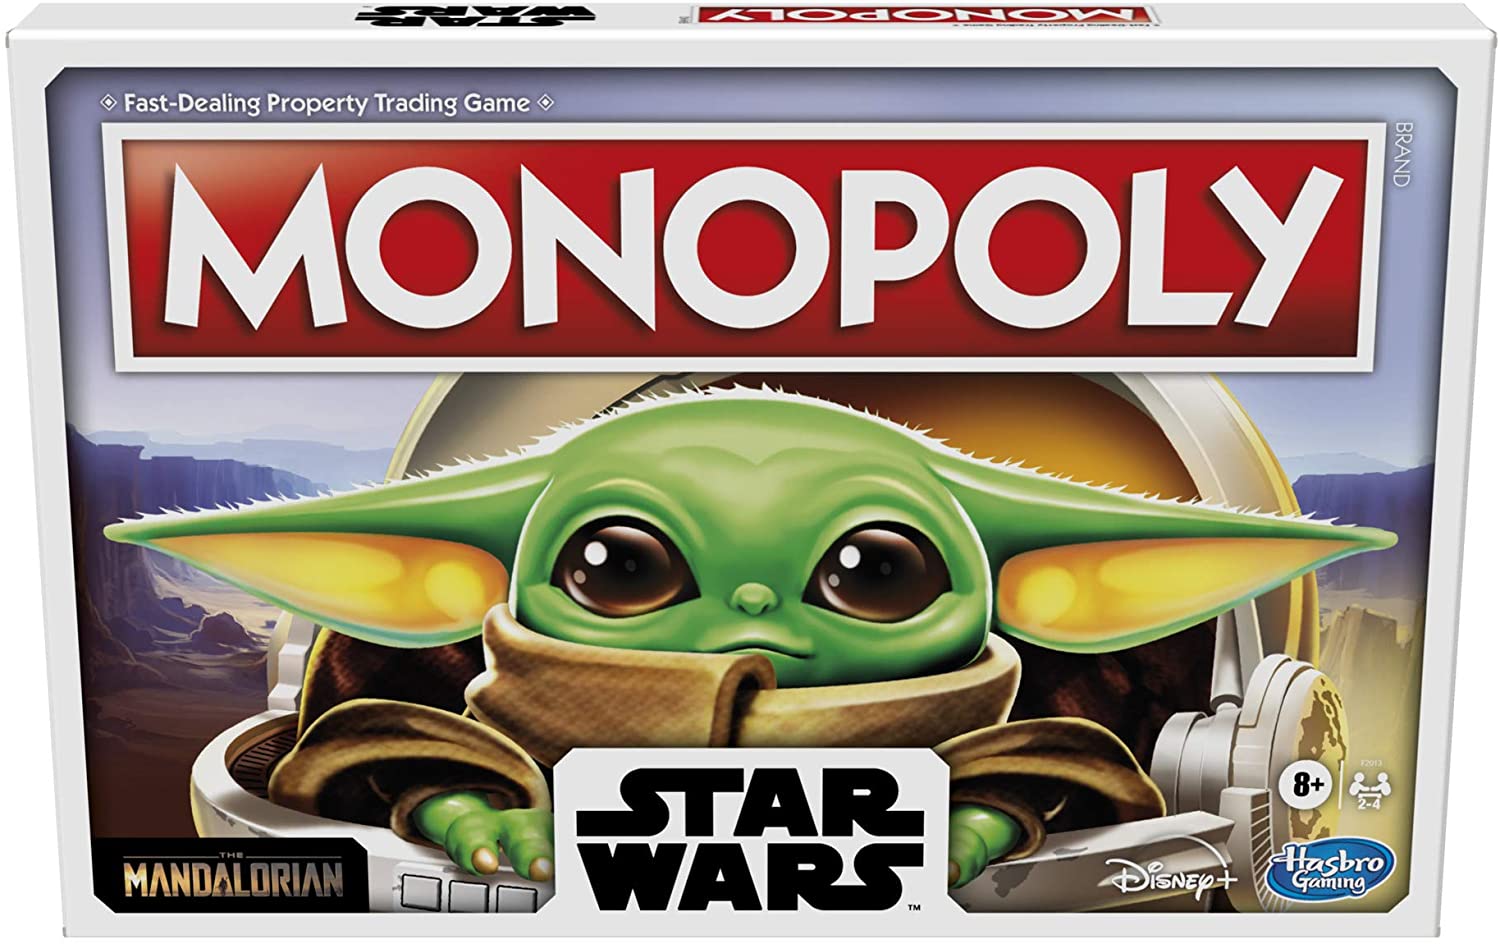 Monopoly Star Wars The Child (Baby Yoda from The Mandalorian) Edition Board Game In Stock Today At Phillips Toys!